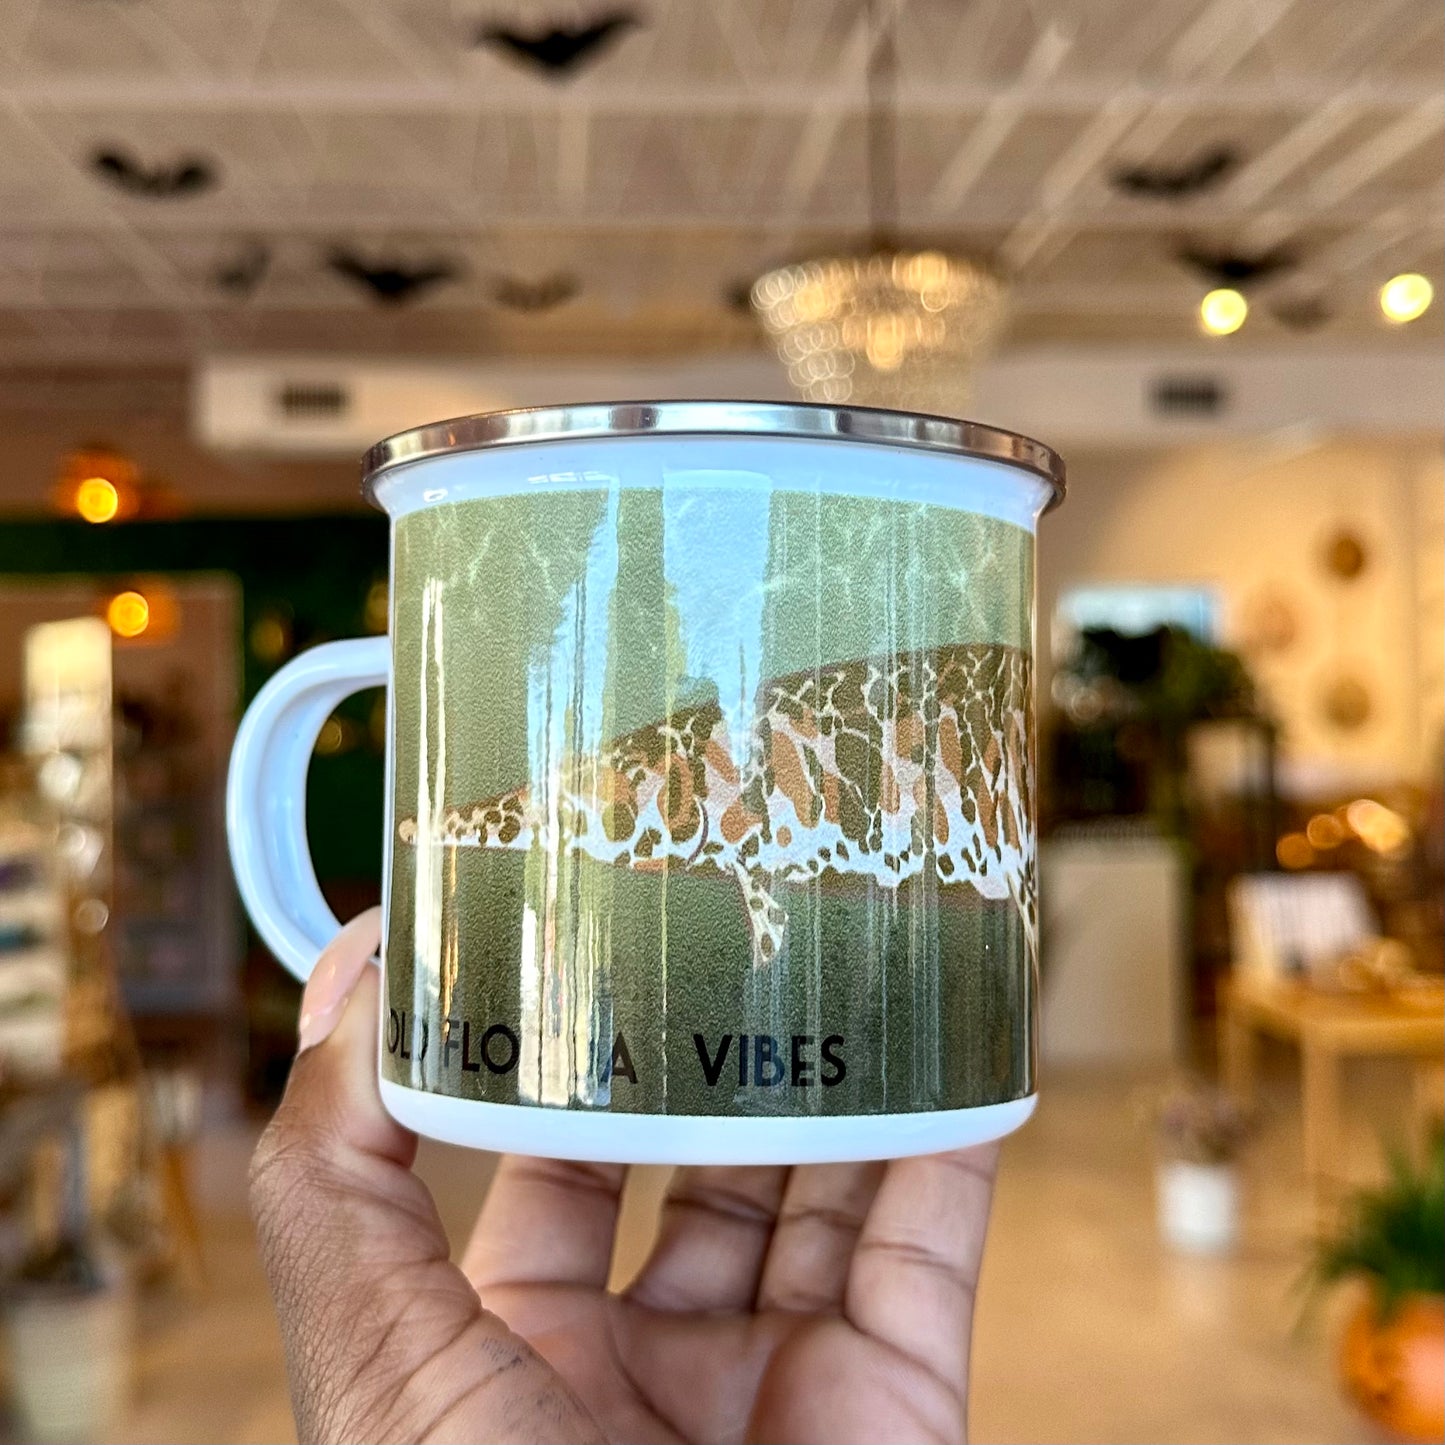 Old Florida Vibes Cup